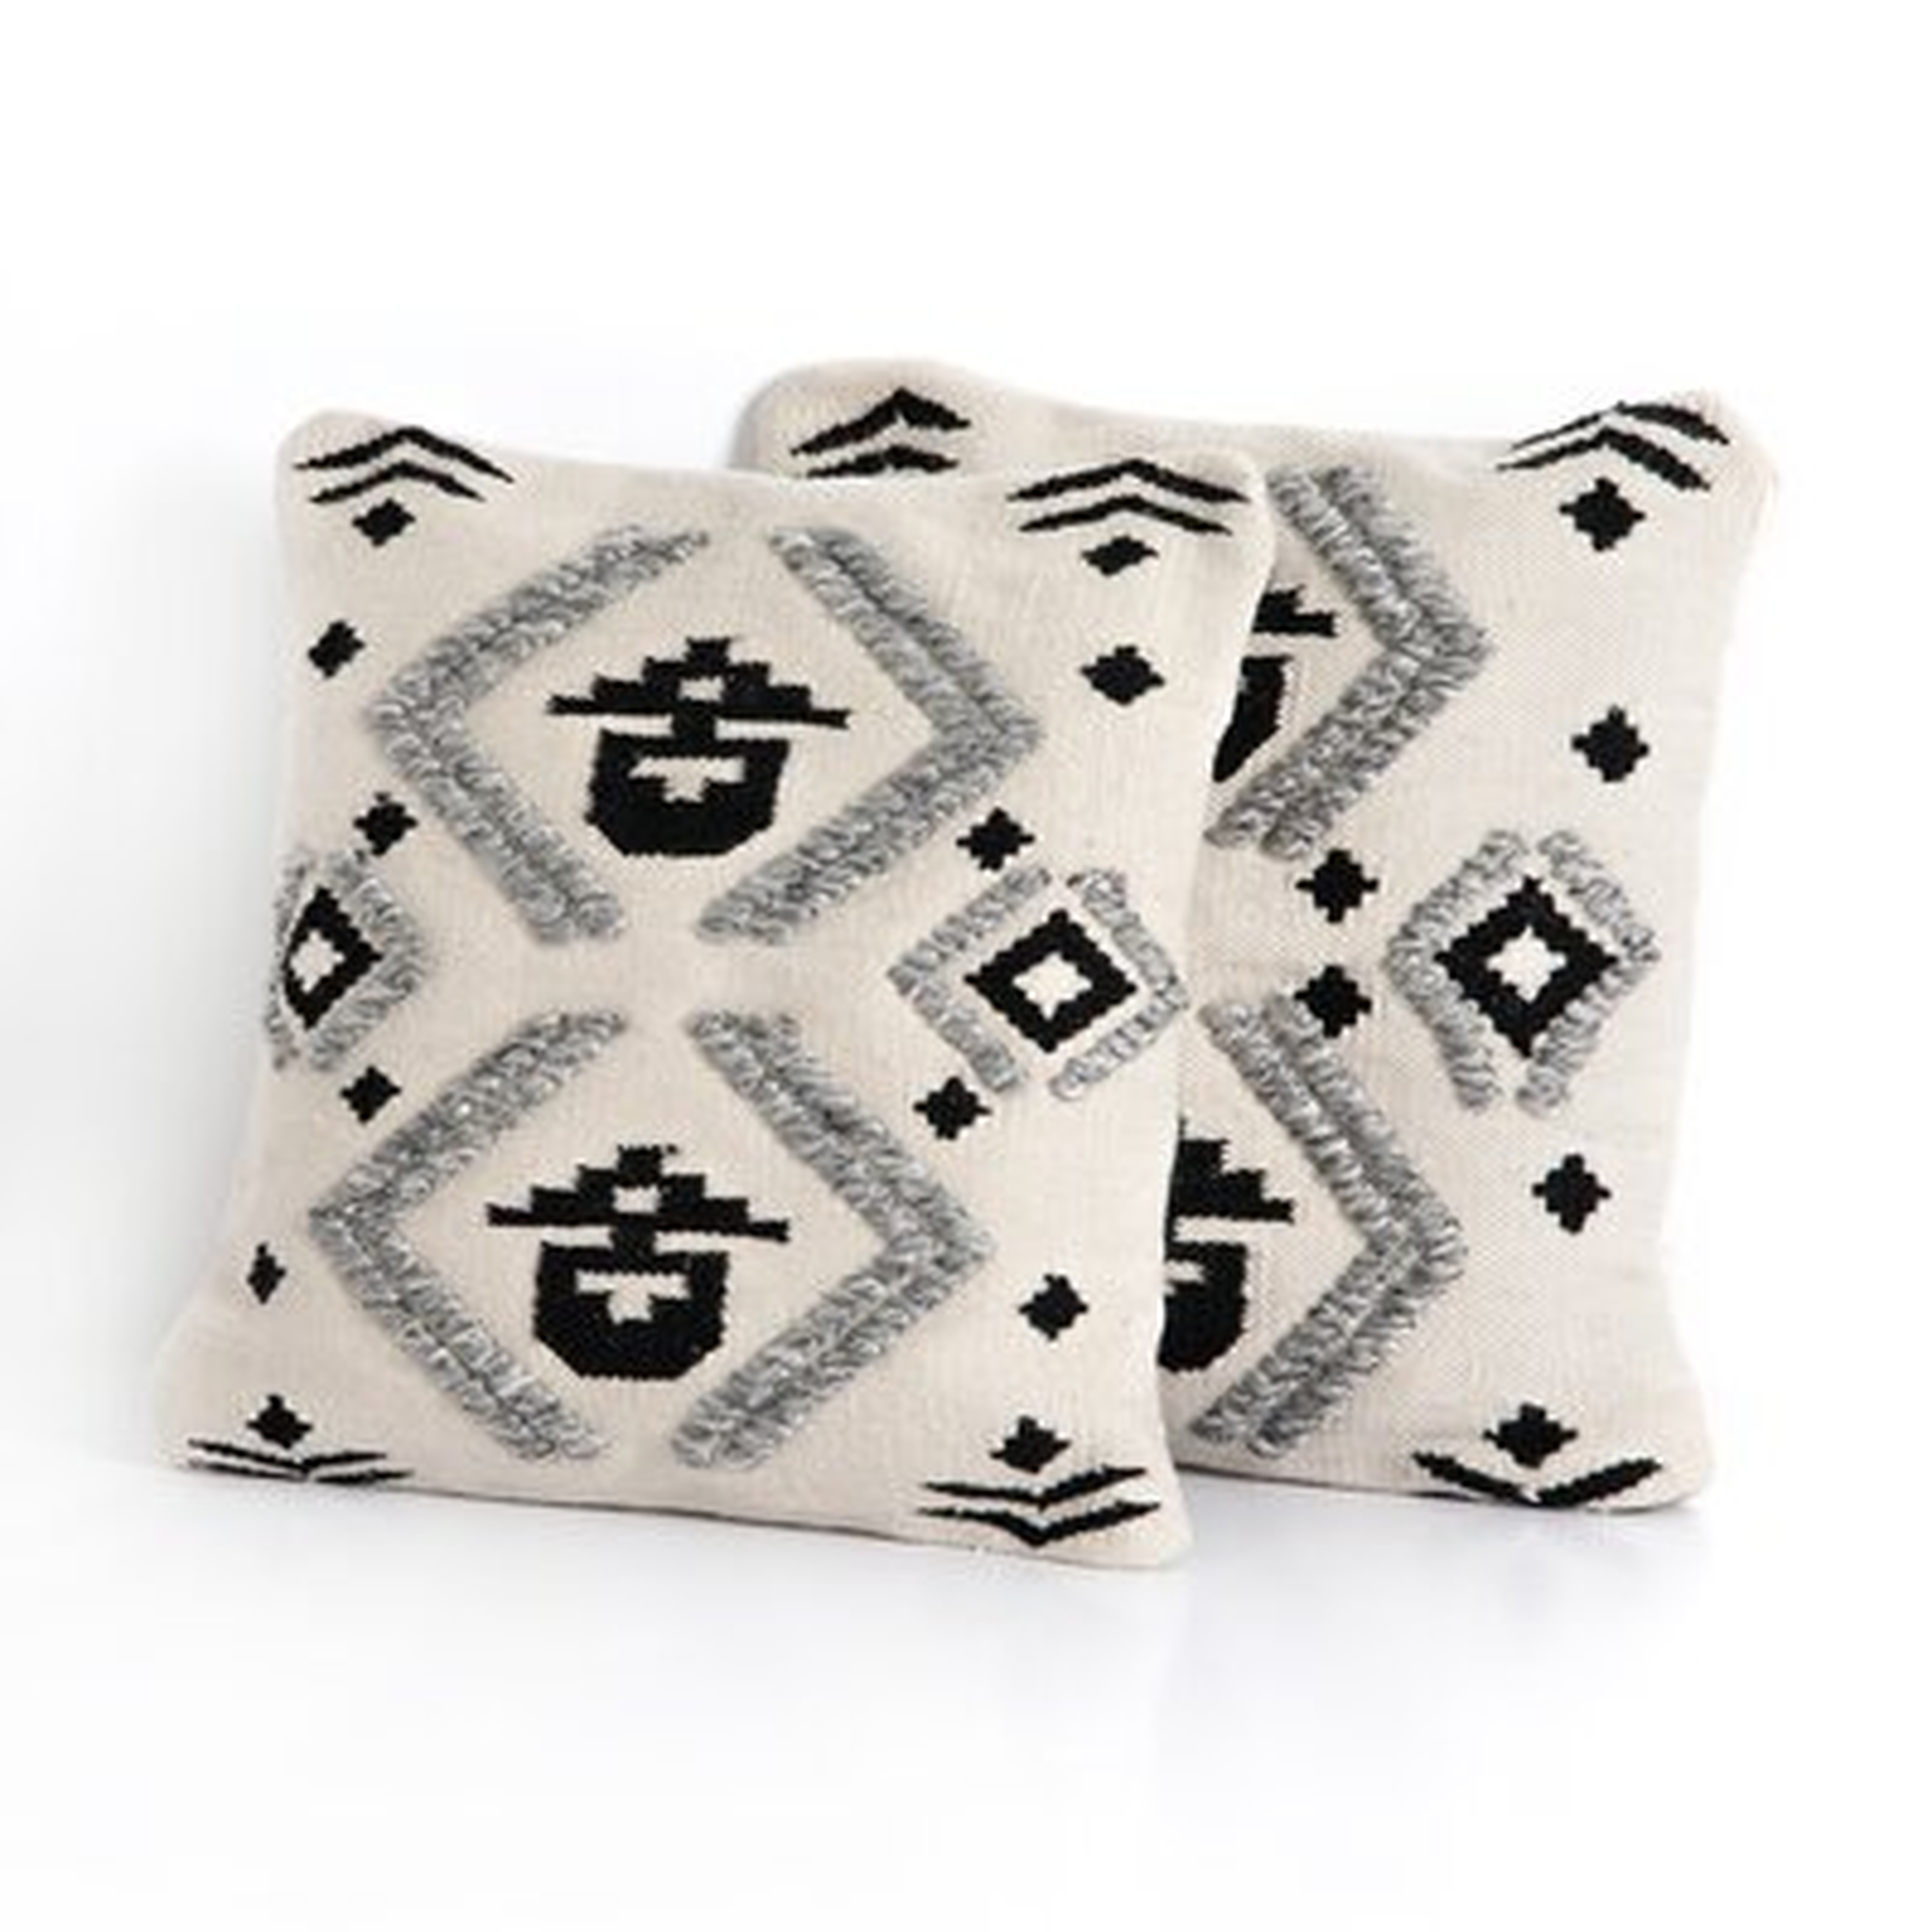 Hubble Maria Outdoor Square Pillow Cover & Insert - AllModern